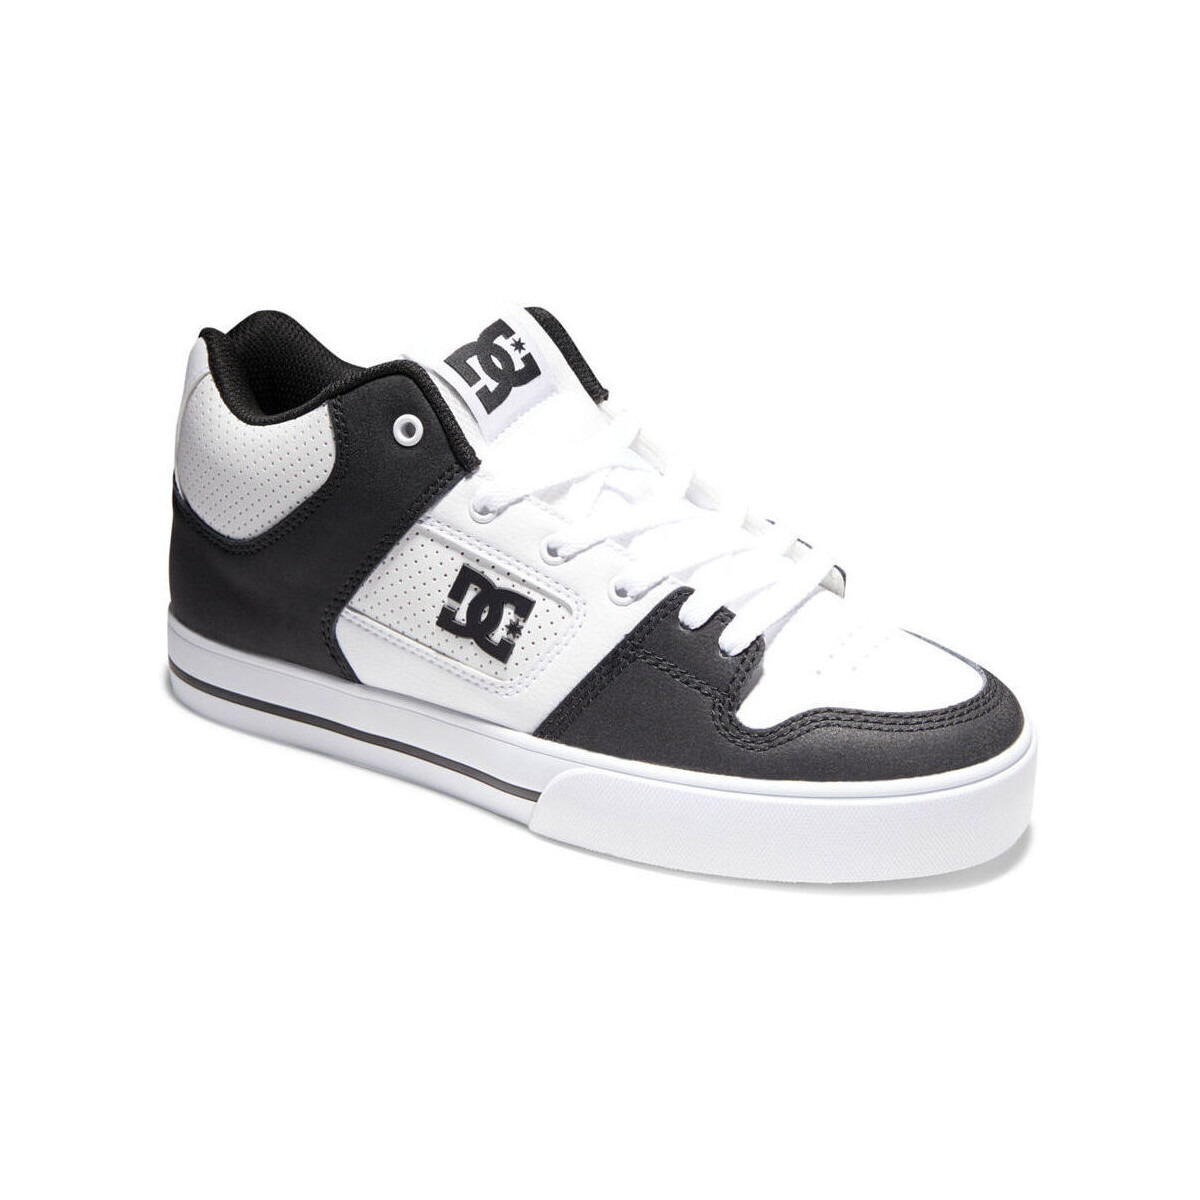 Spartoo - Men's Sneakers White by Dc Shoes GOOFASH